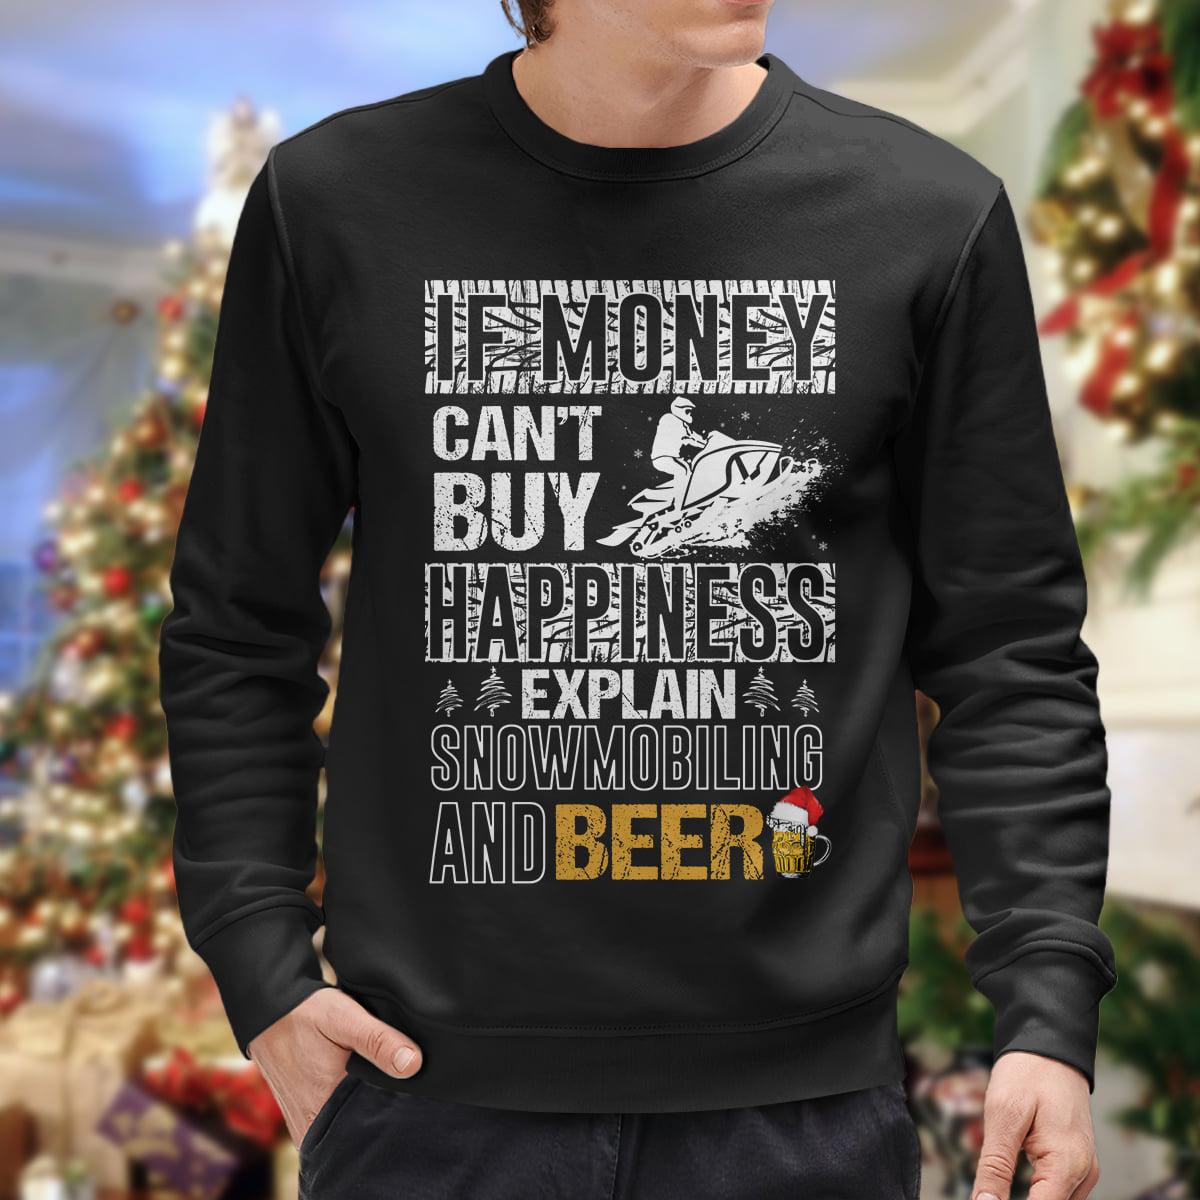 Snowmobile Beer - If money can't buy happiness explain snowmobling and beer